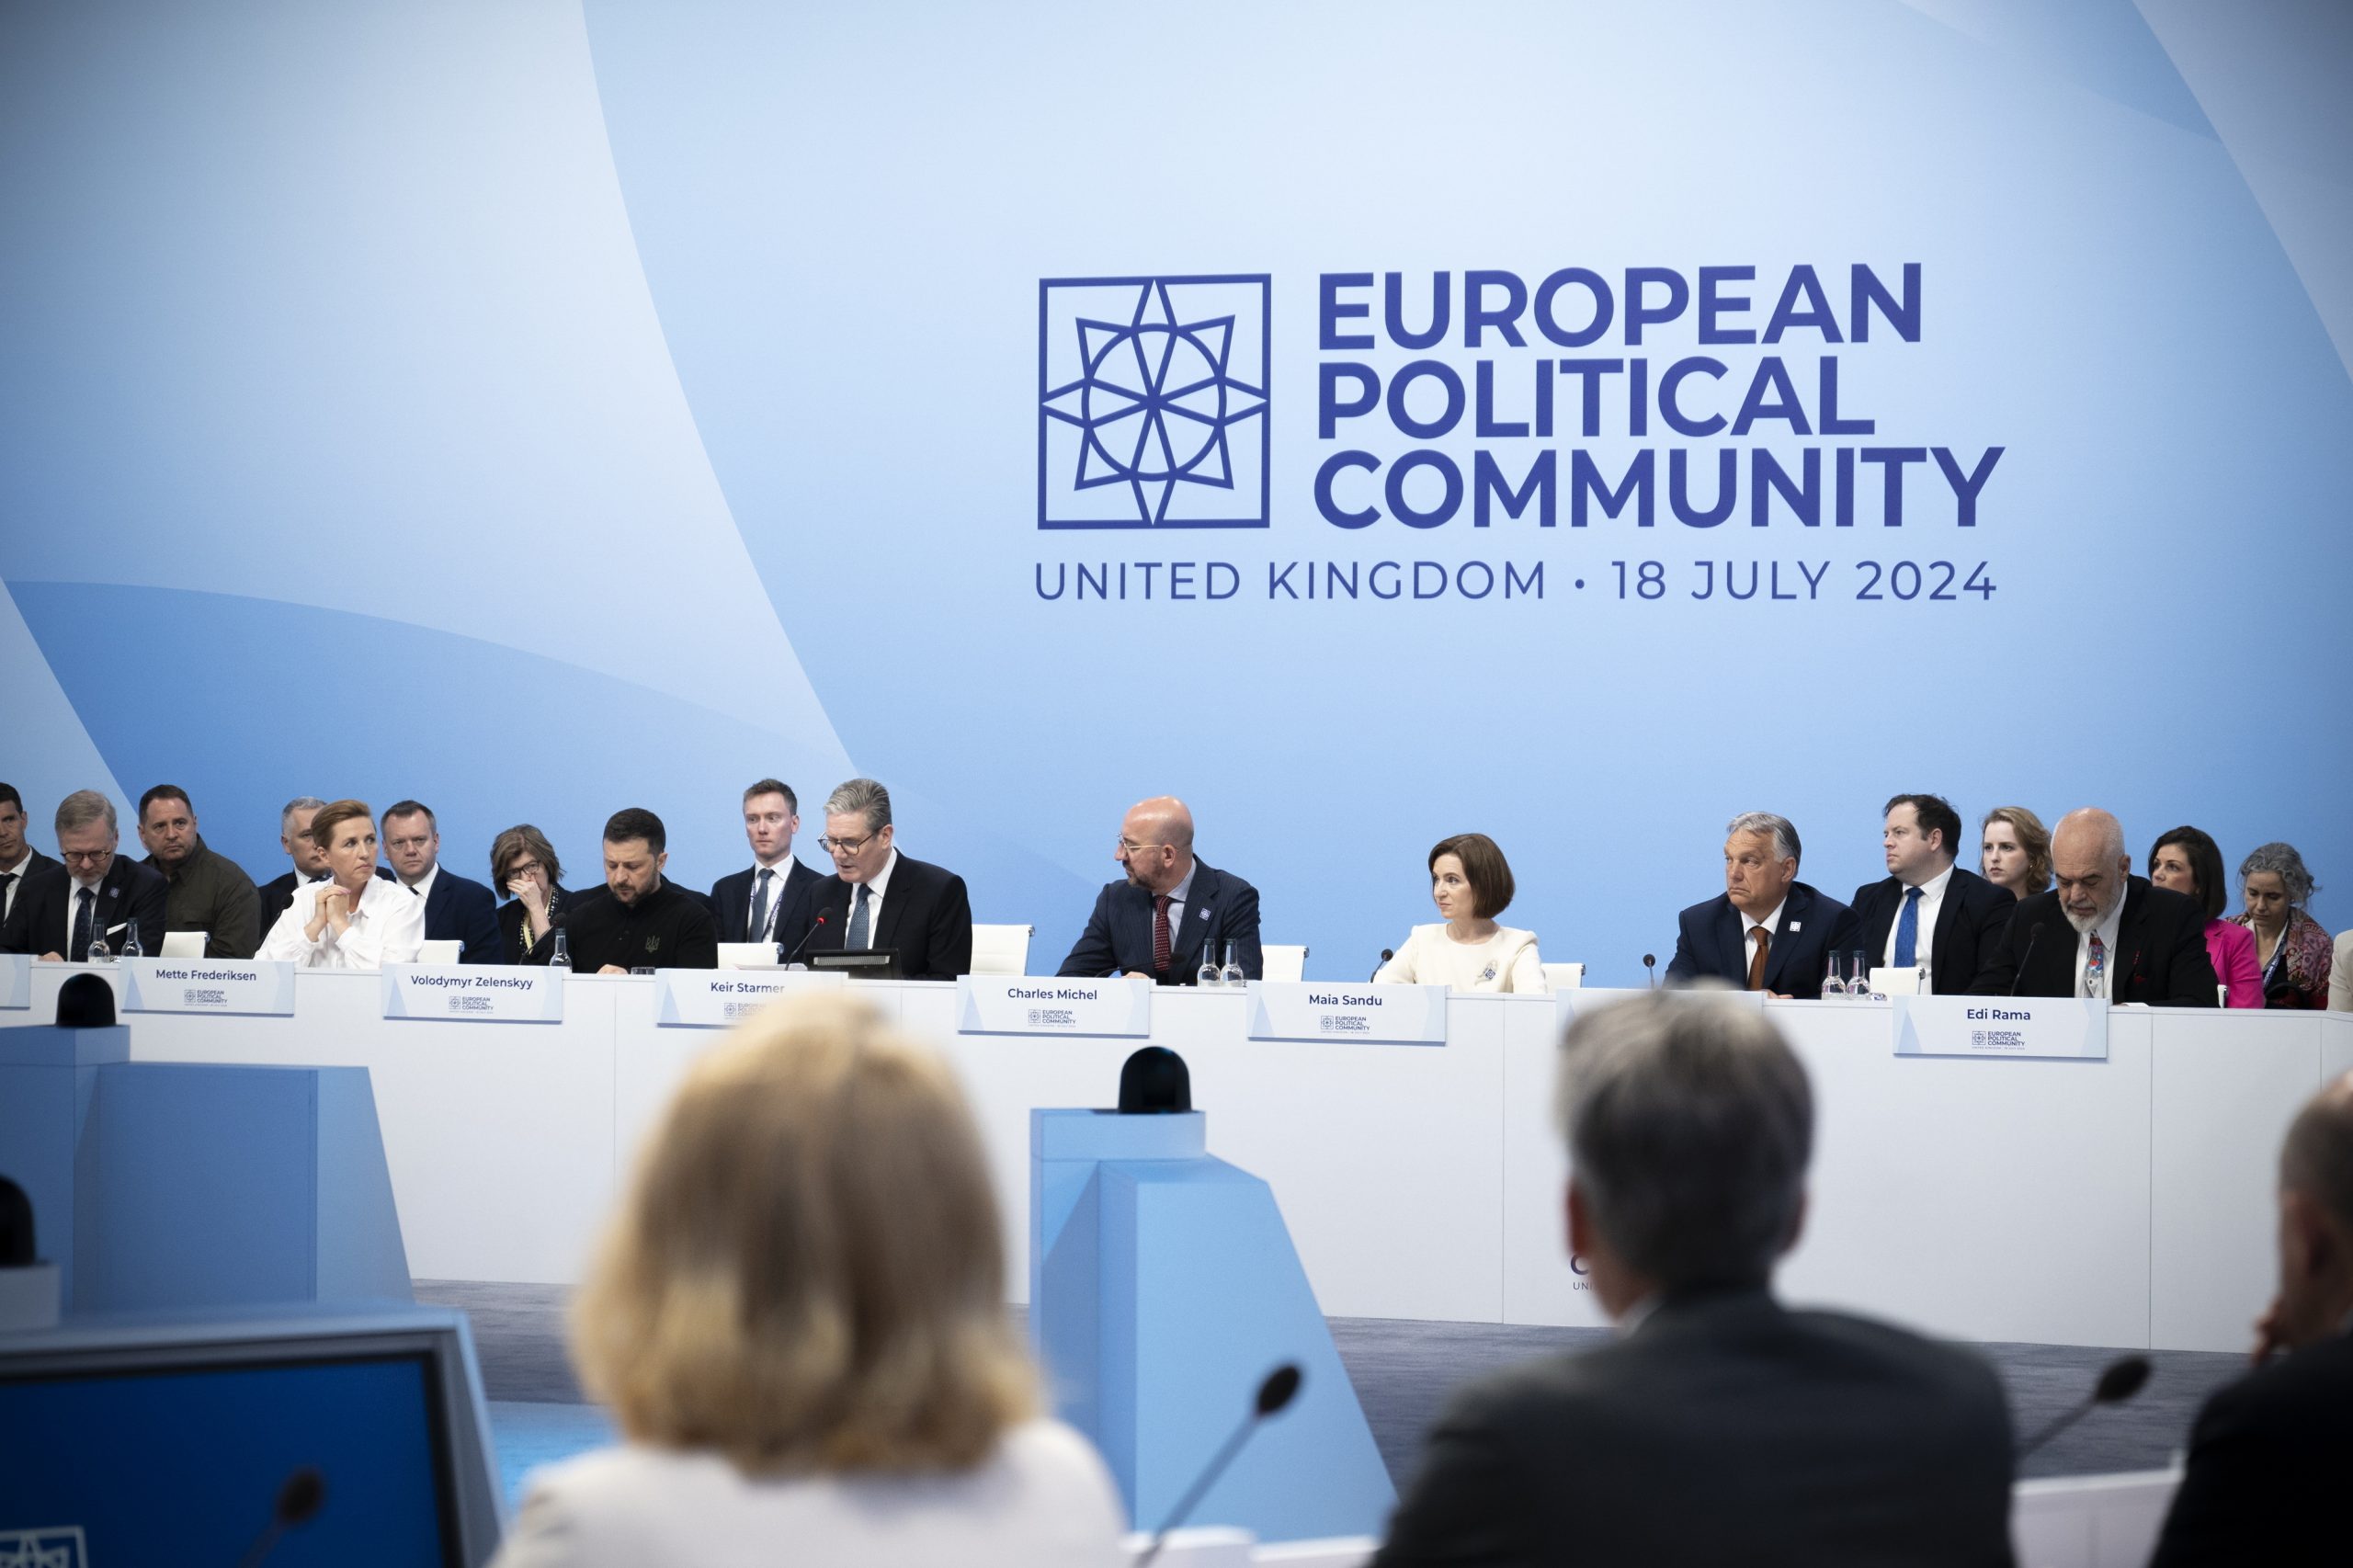 Hungary to Host the next European Political Community Summit